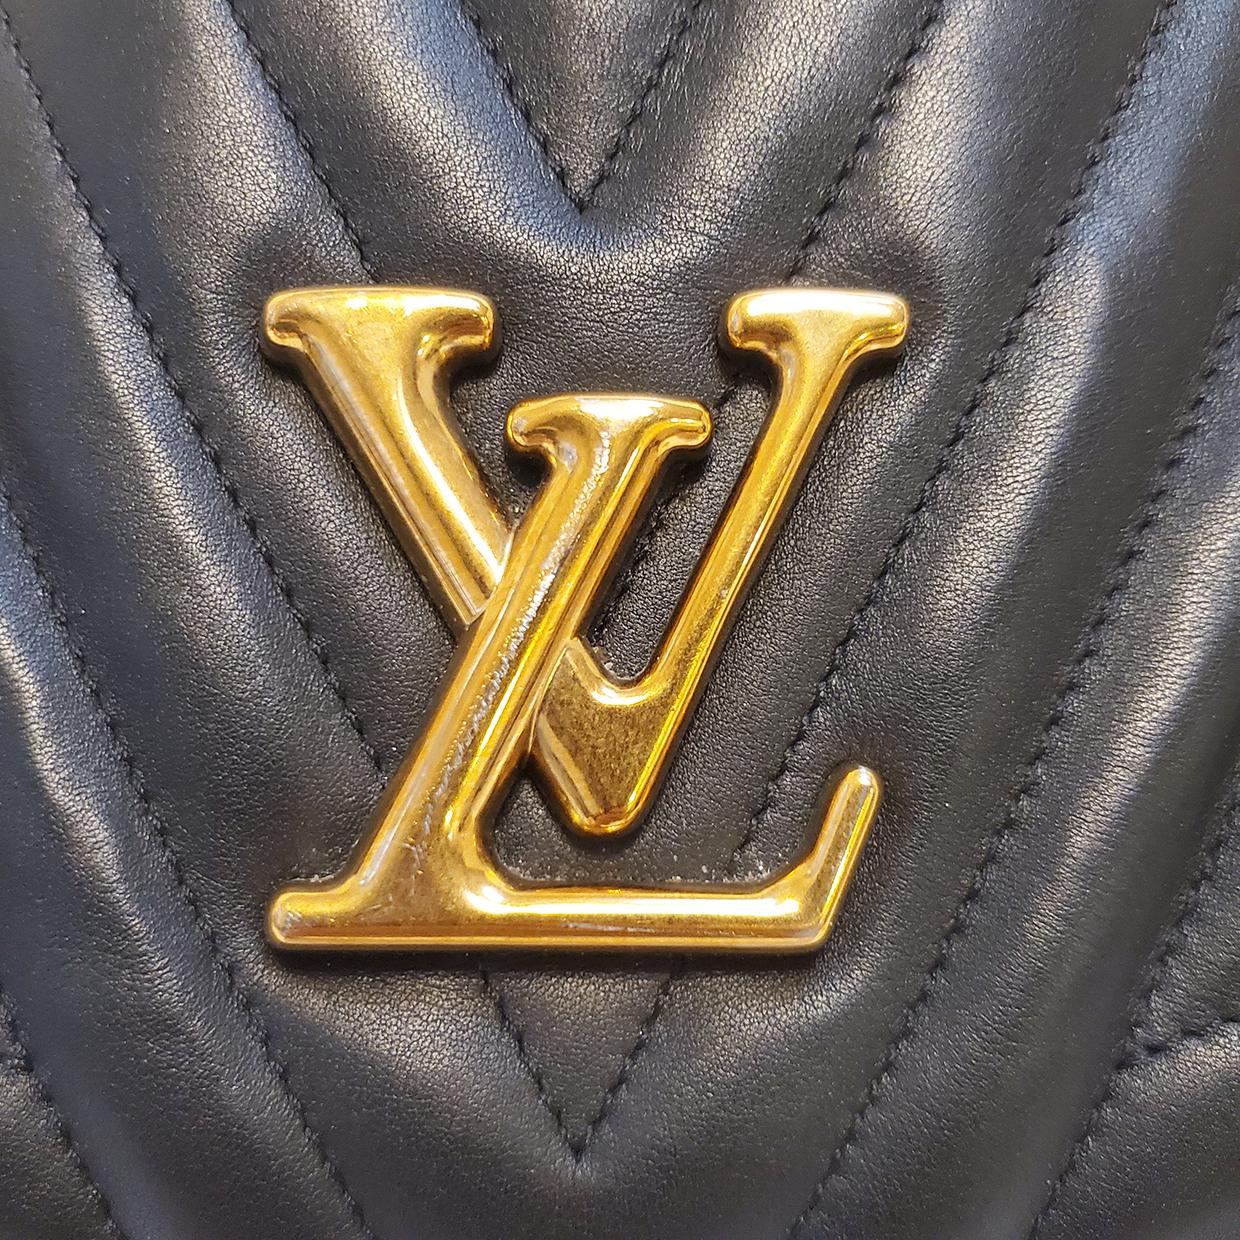 louis vuitton quilted purse